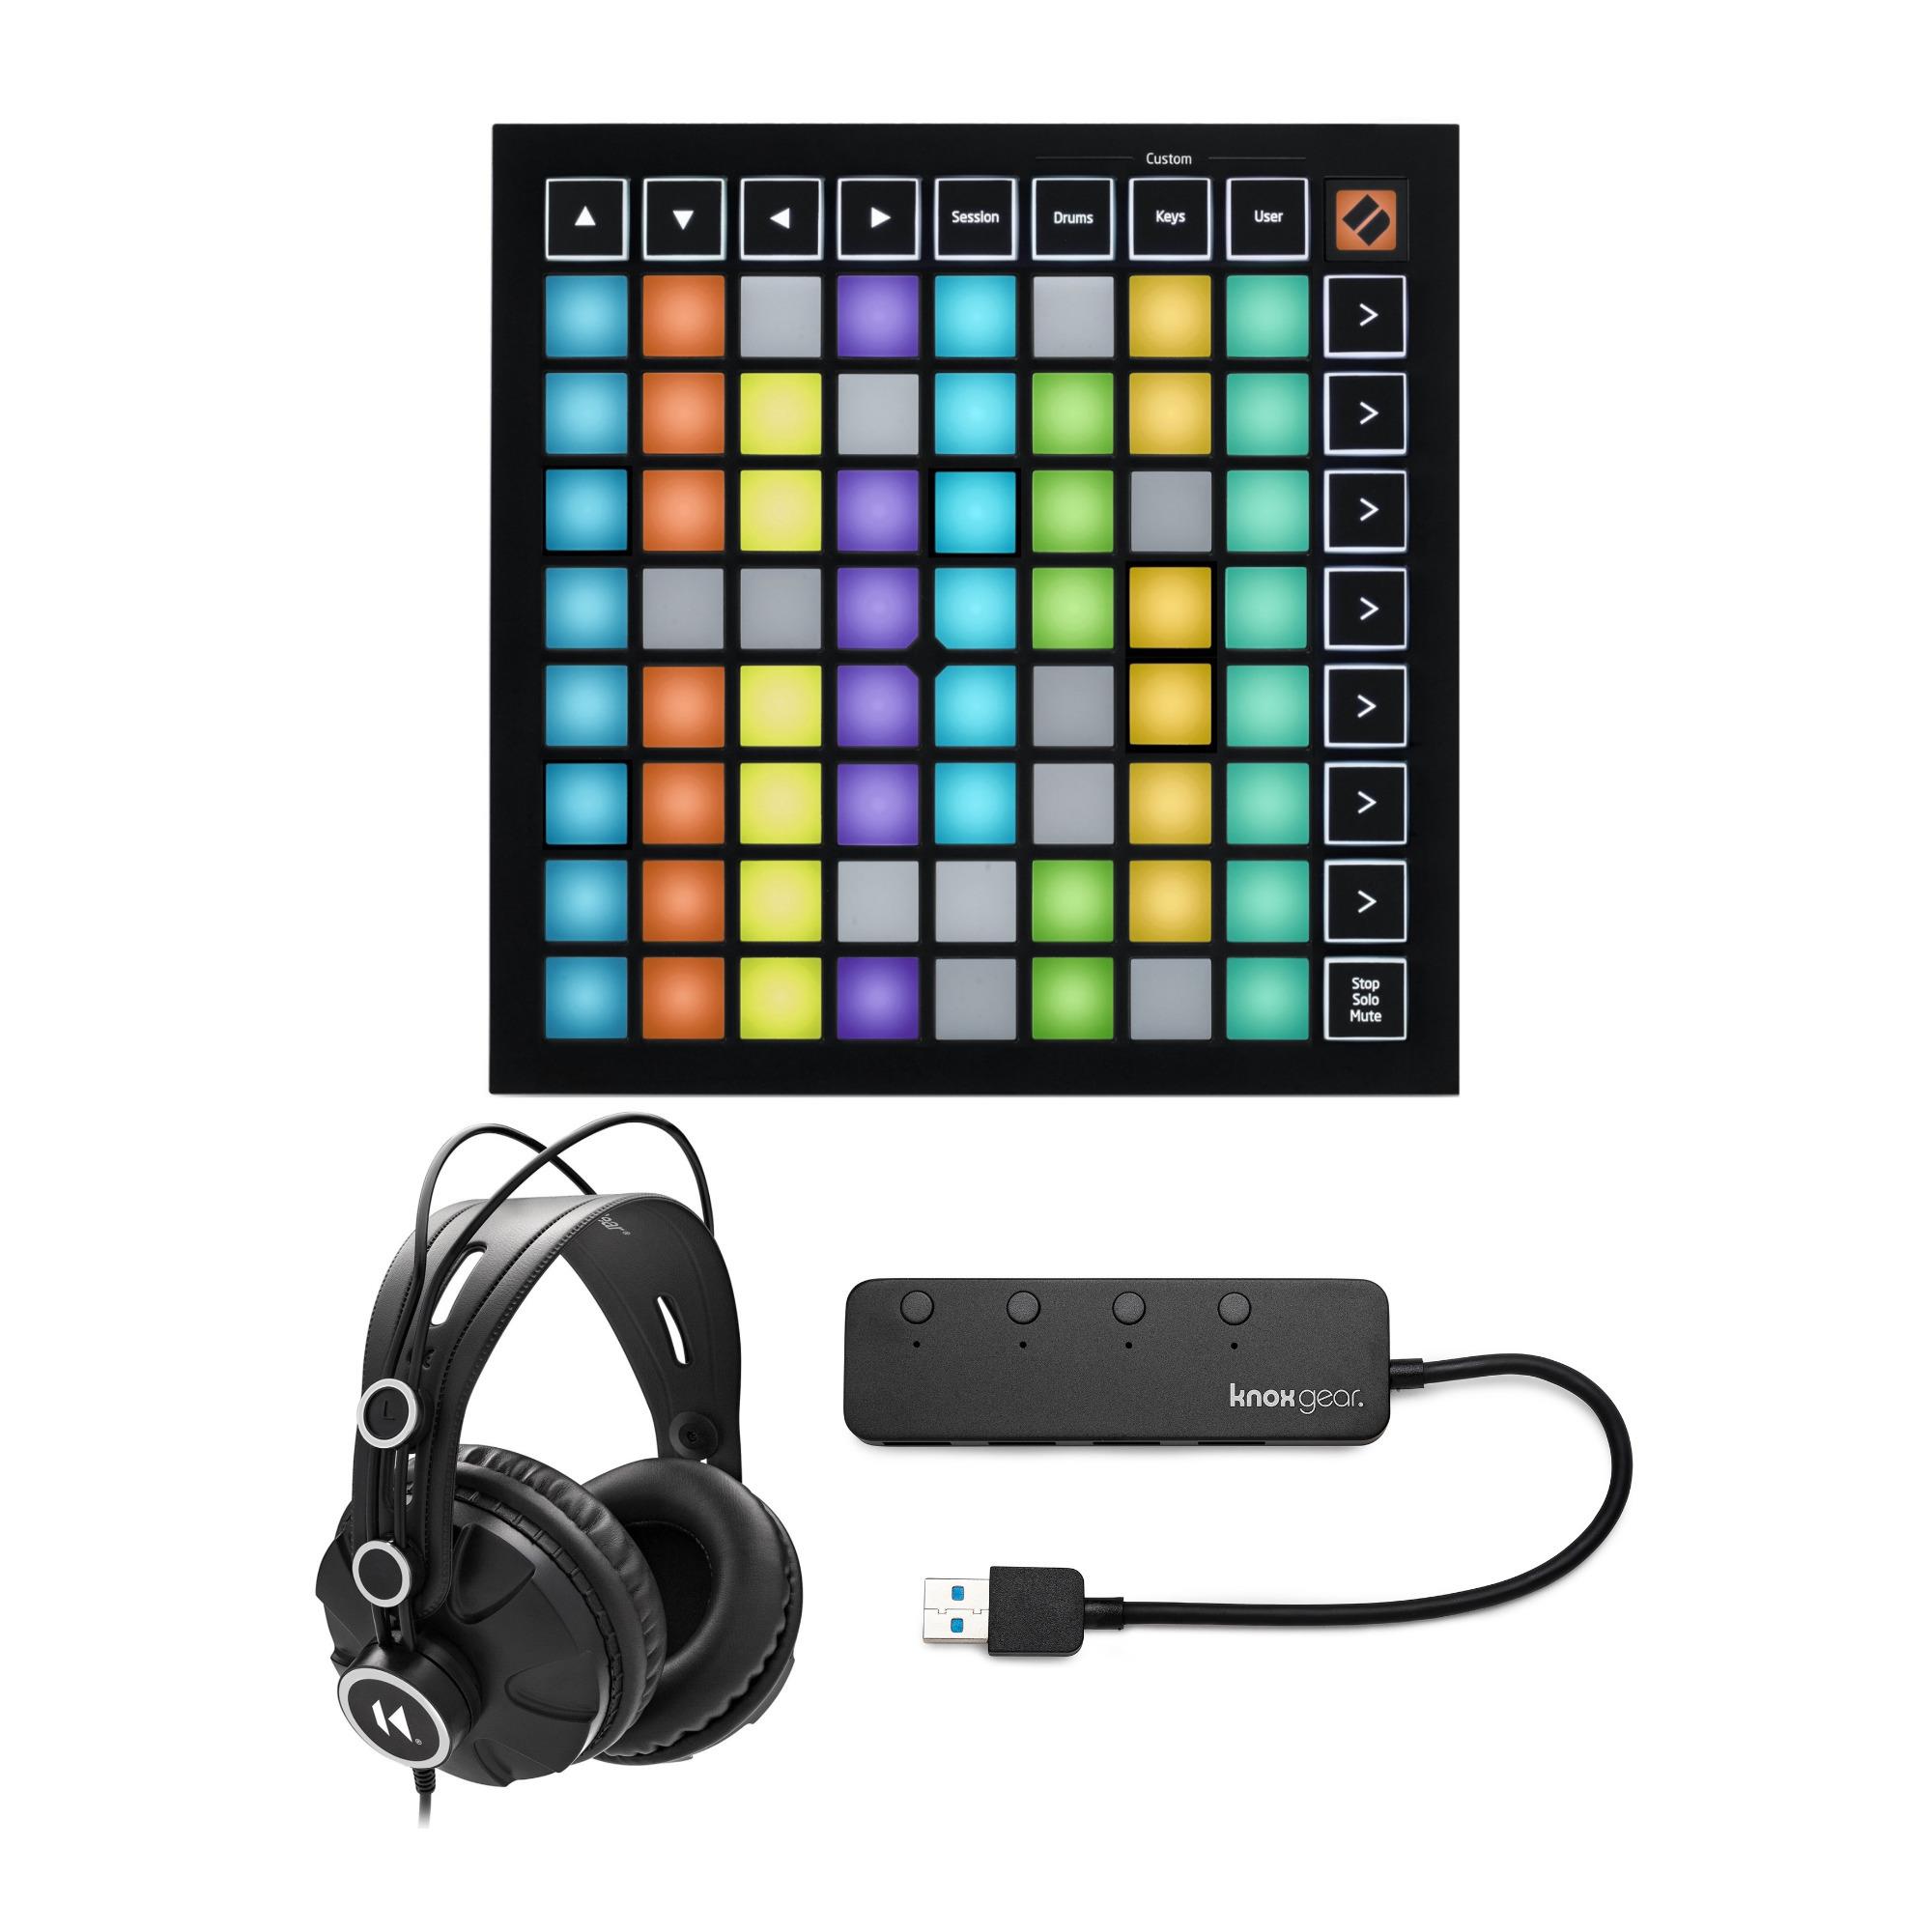 Hub　Grid　Headphones　Novation　Mini　Ableton　for　Bundle　Controller　Port　and　Launchpad　3.0　USB　Live　MK3　Knox　with　(3